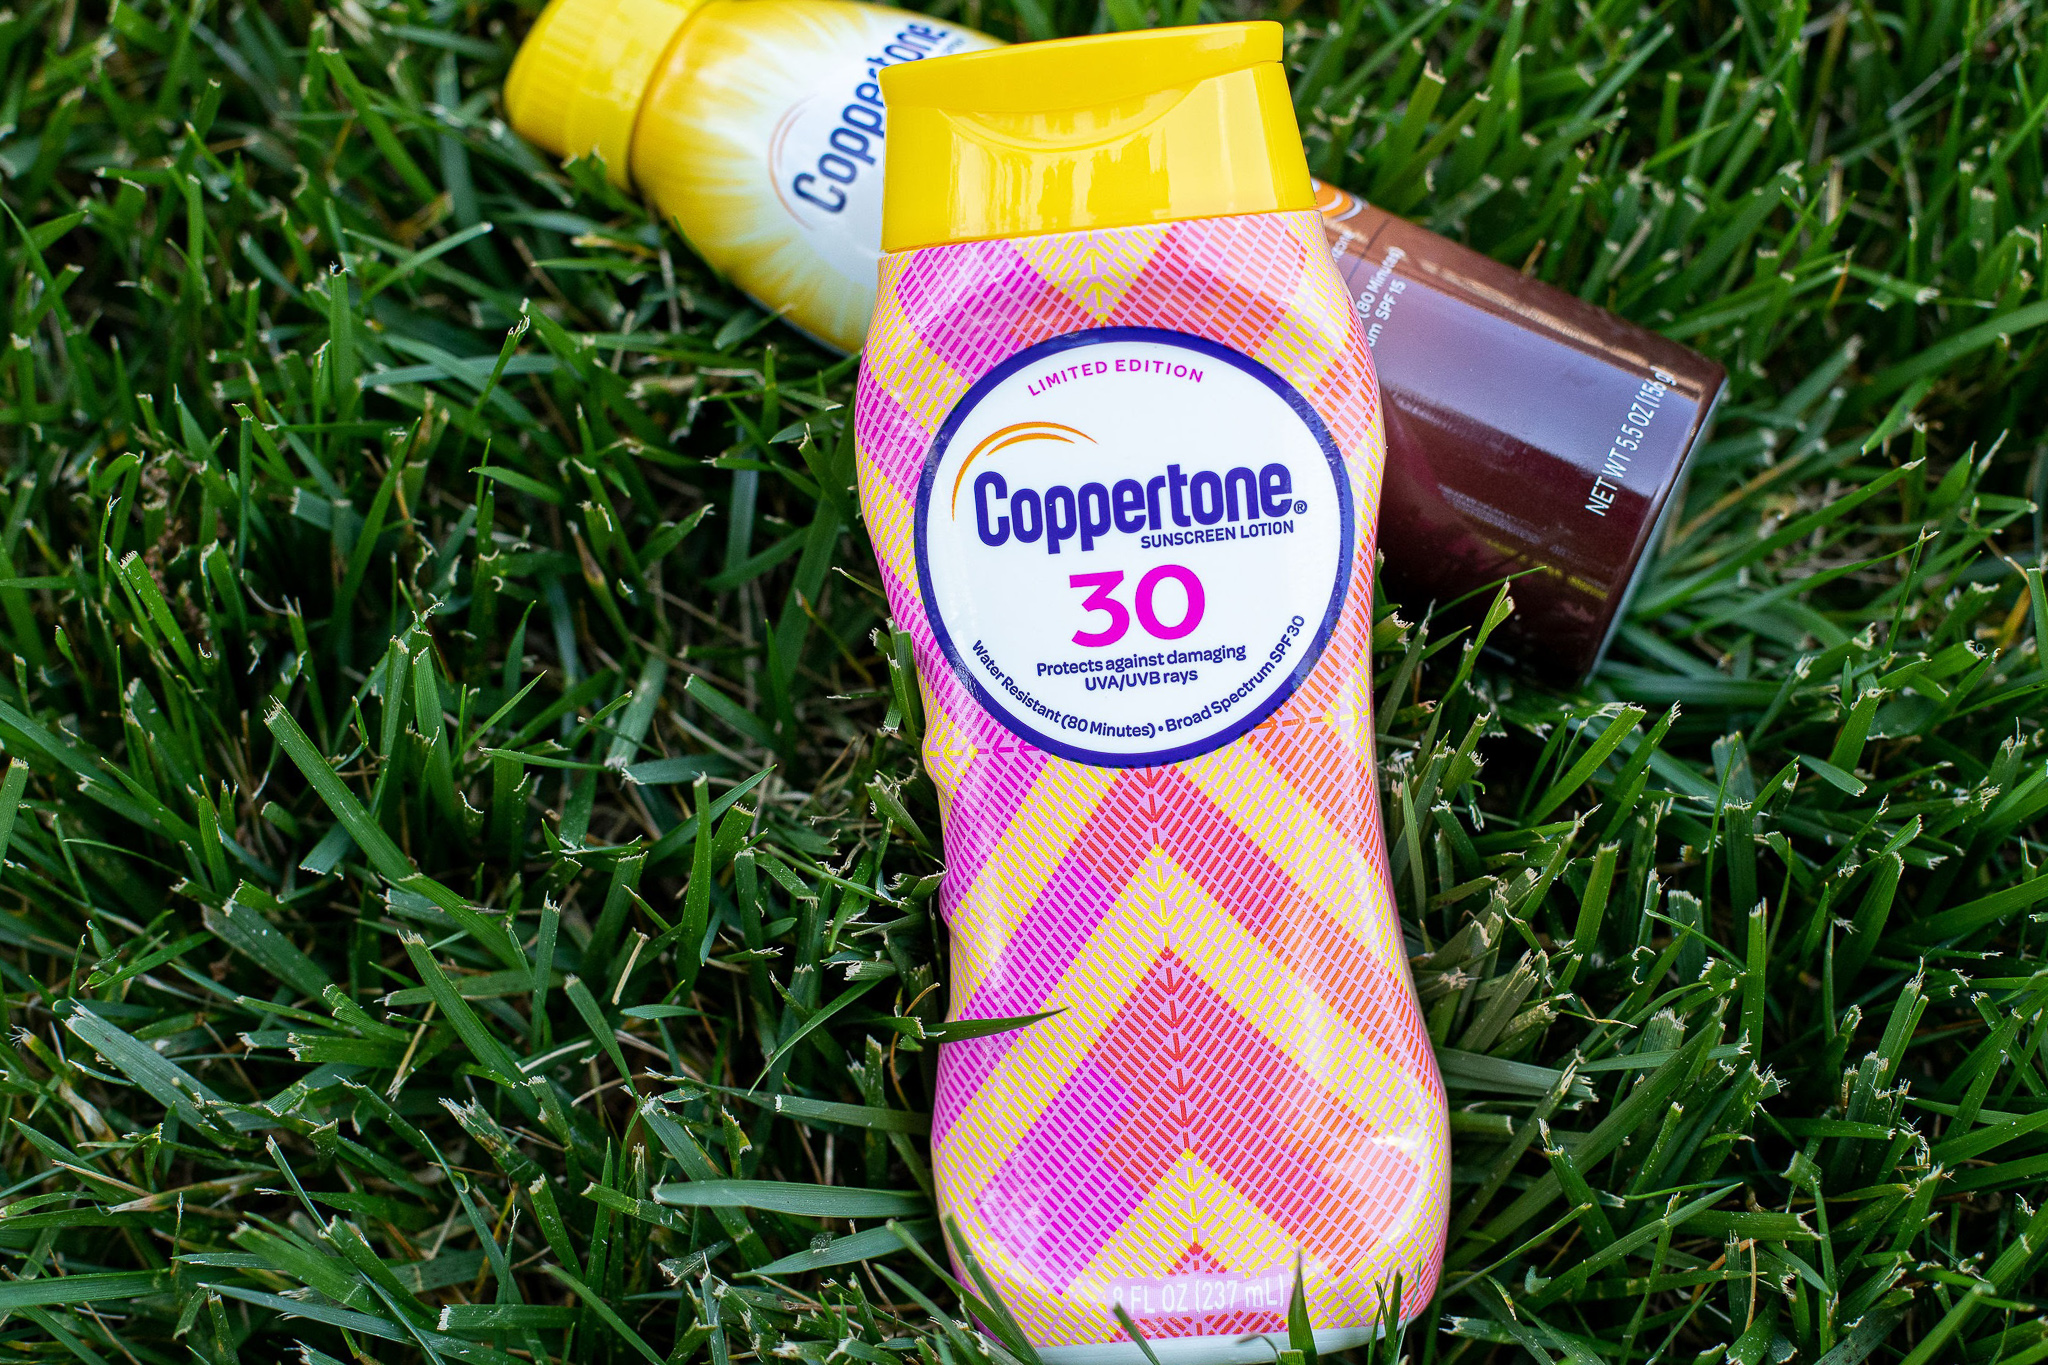 Coppertone Sunscreen As Low As $6.99 At Kroger